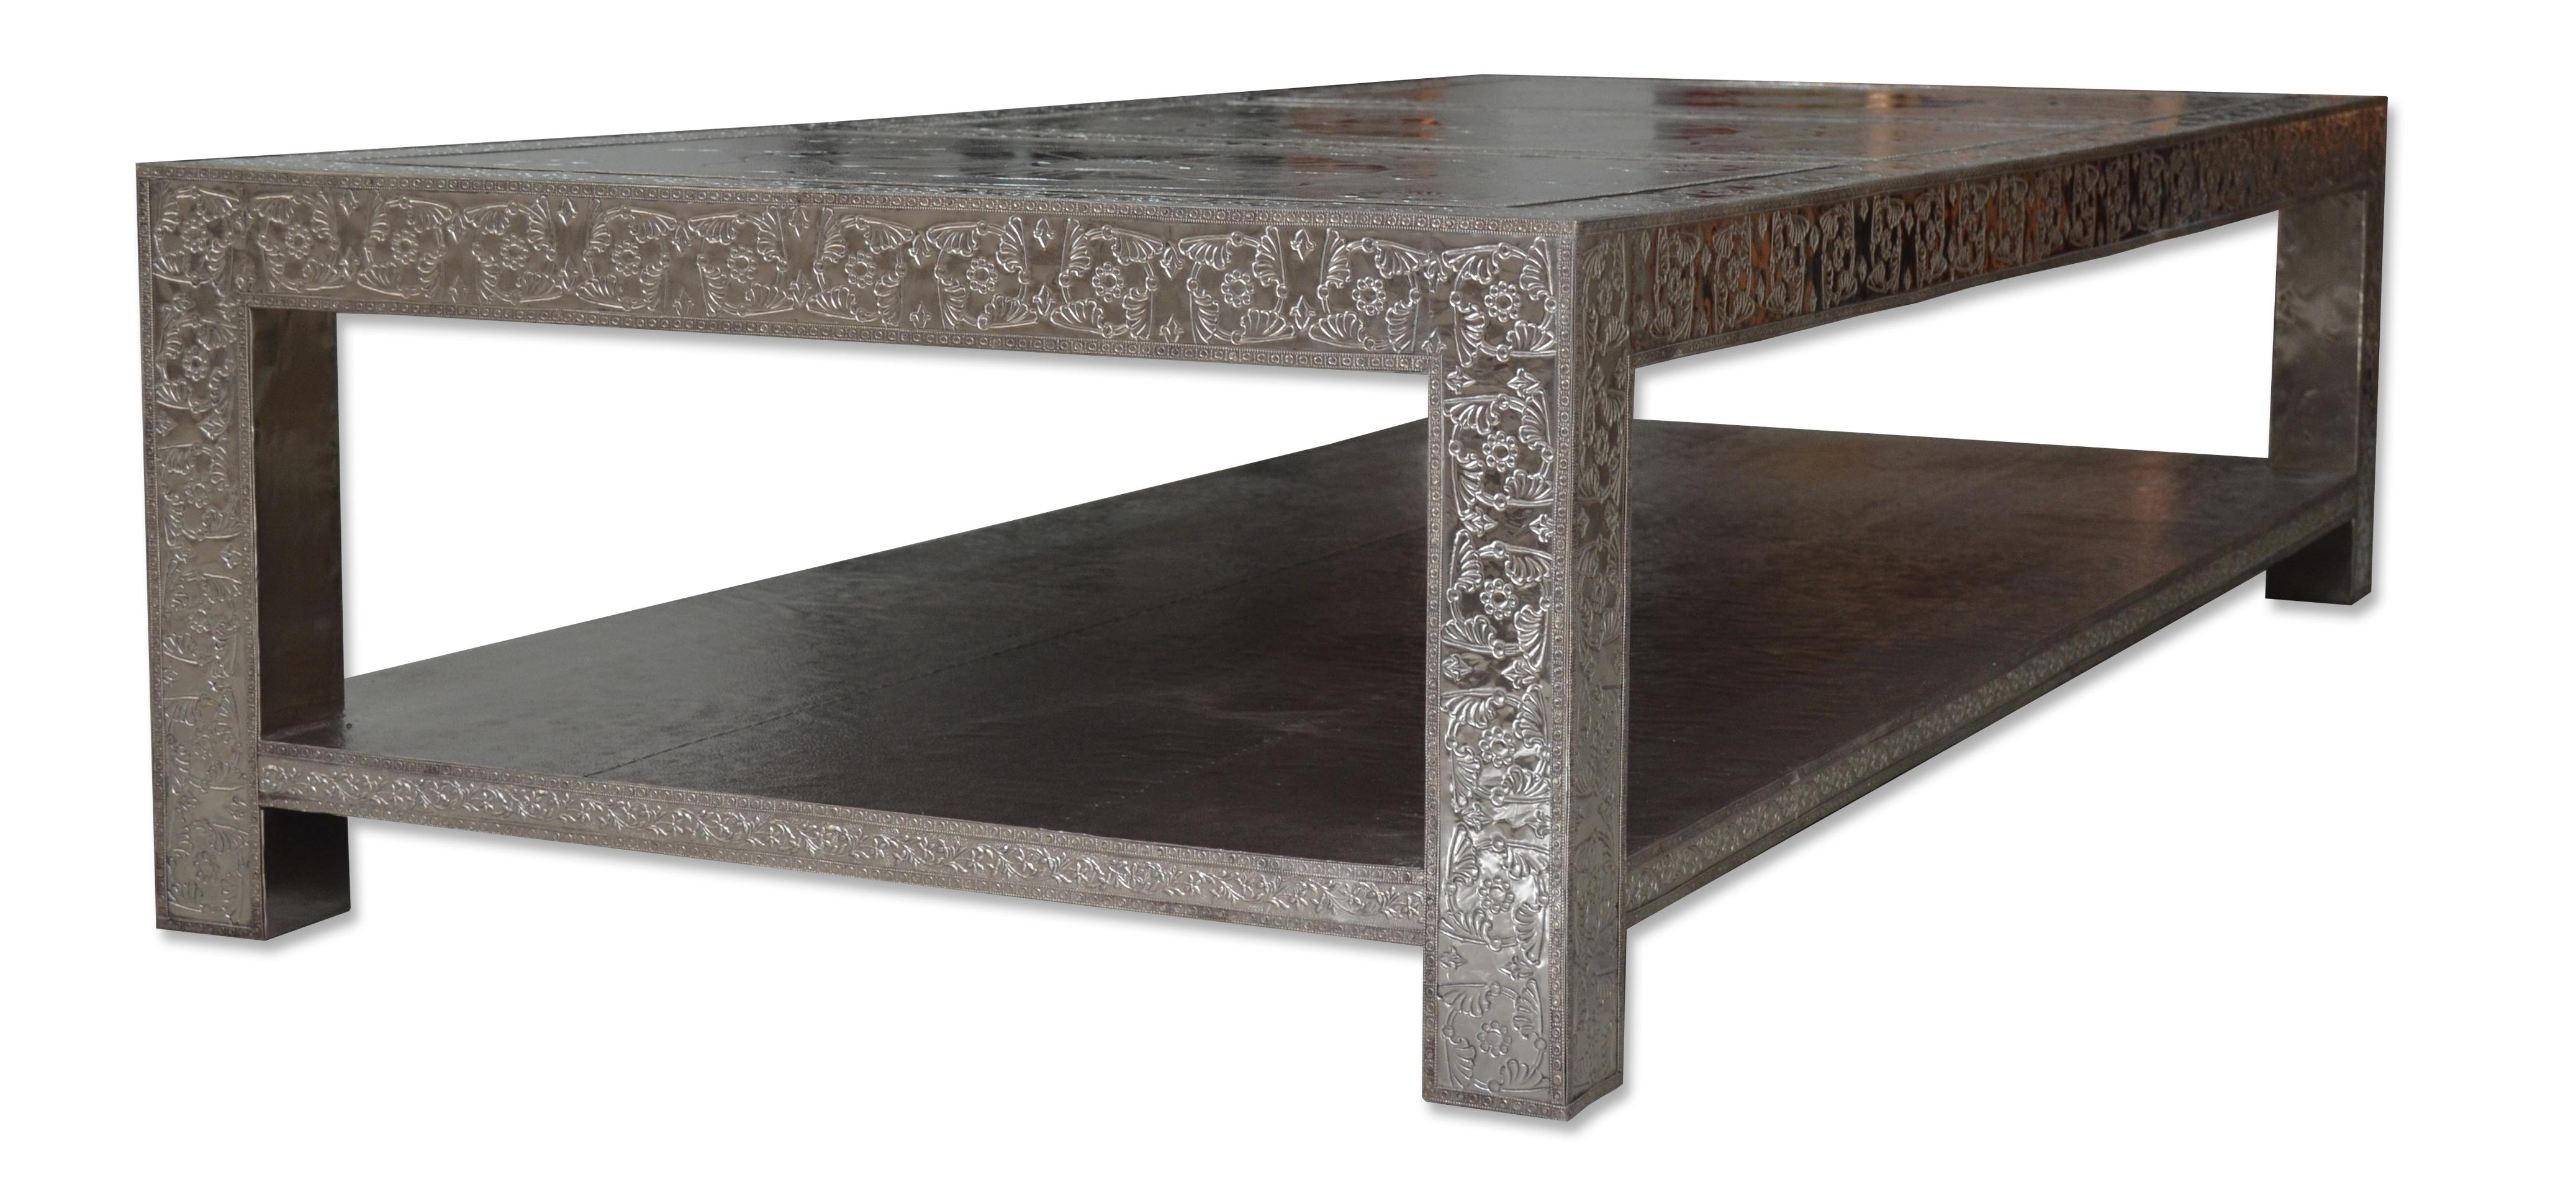 Indian Three Lotus Coffee Table in White Bronze by Stephanie Odegard For Sale